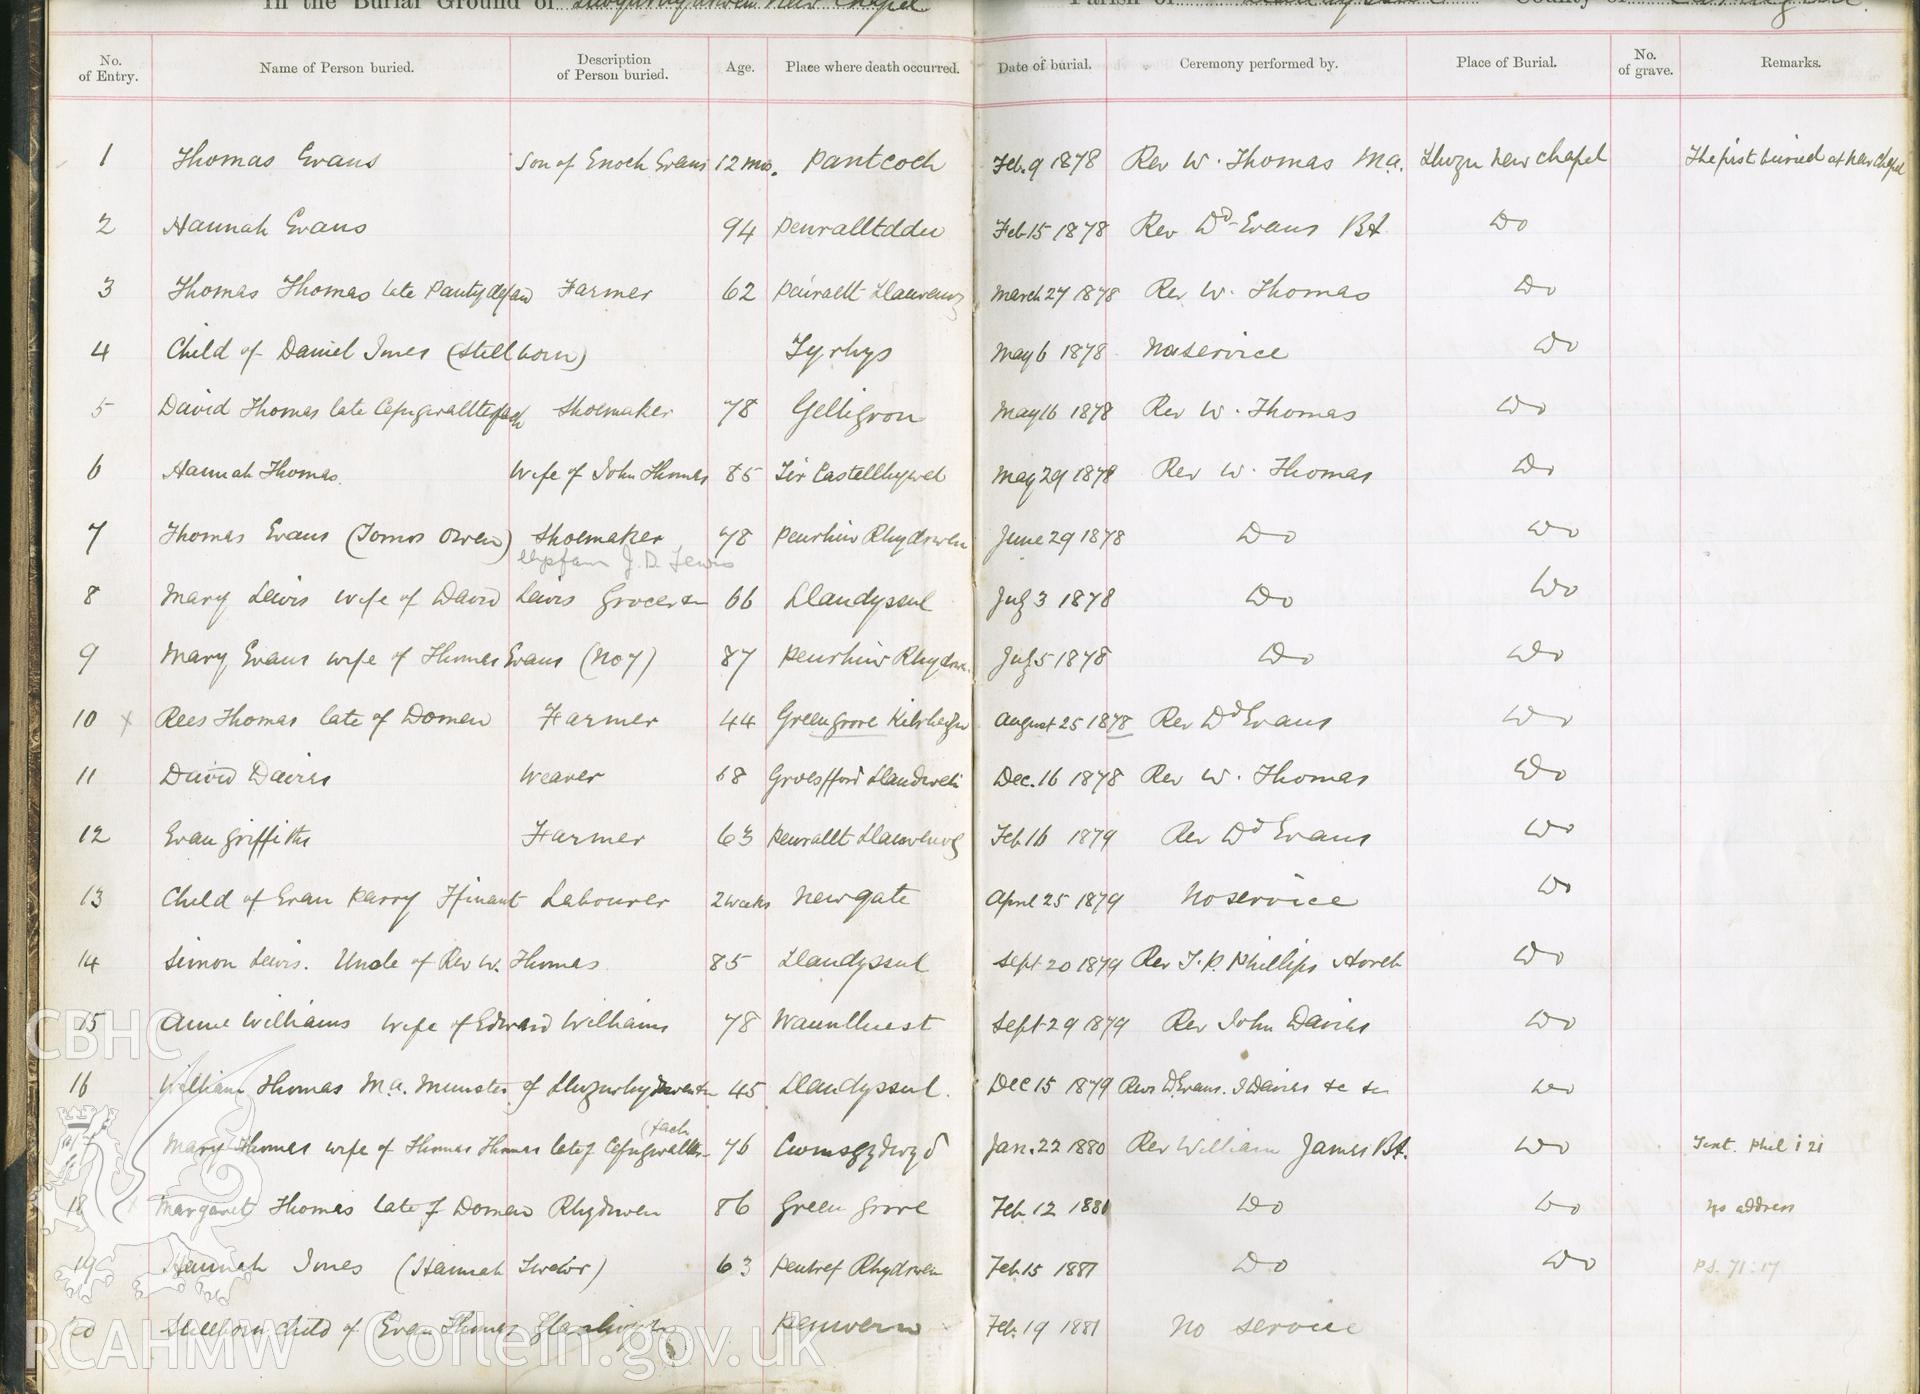 Scanned copy of handwritten burial register at Llwydrhydowen New Chapel from 9th February 1878 to 19th February 1881. Donated to the RCAHMW as part of the Digital Dissent Project.